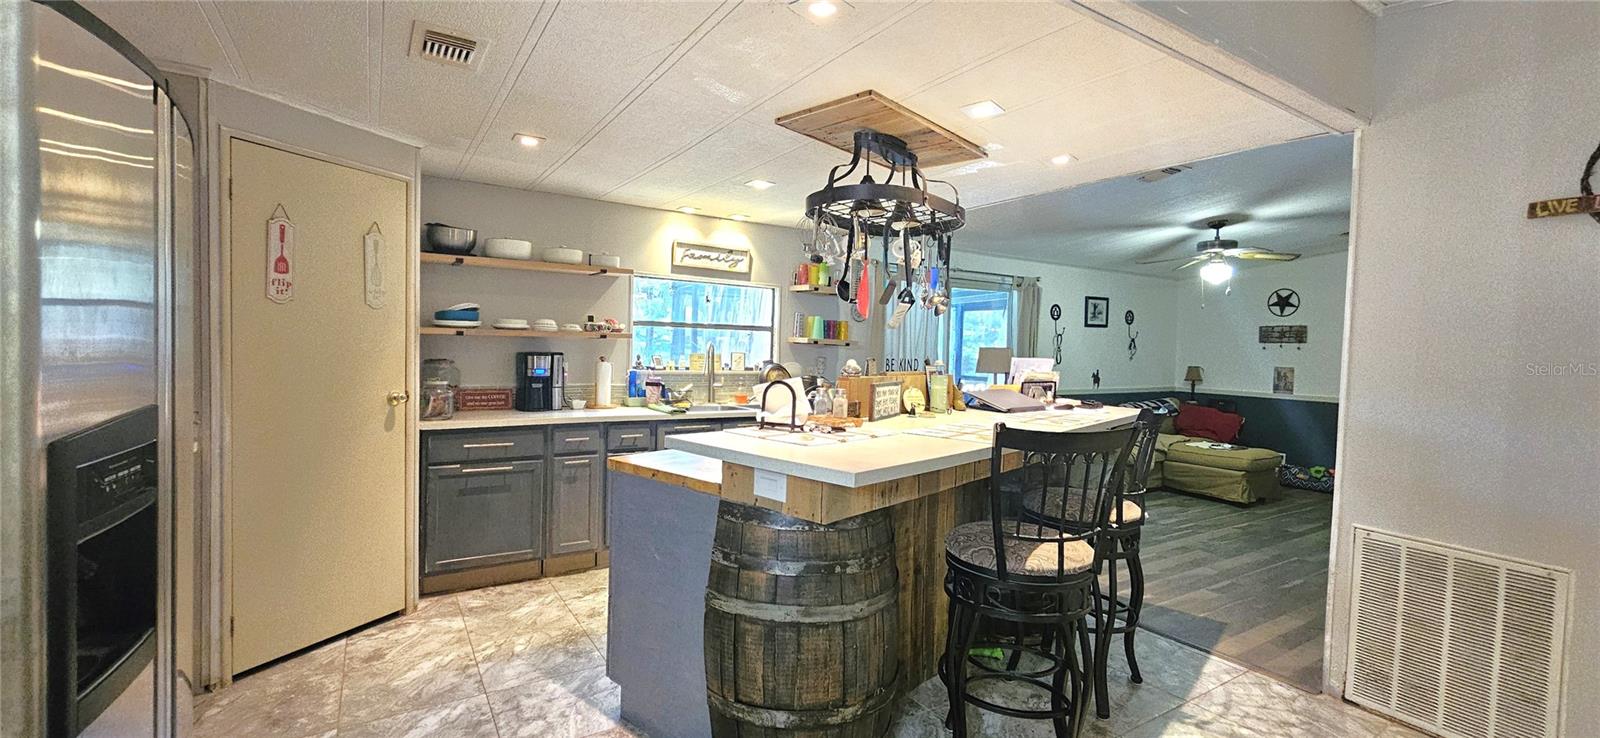 Kitchen includes walk-pantry, propane gas stove